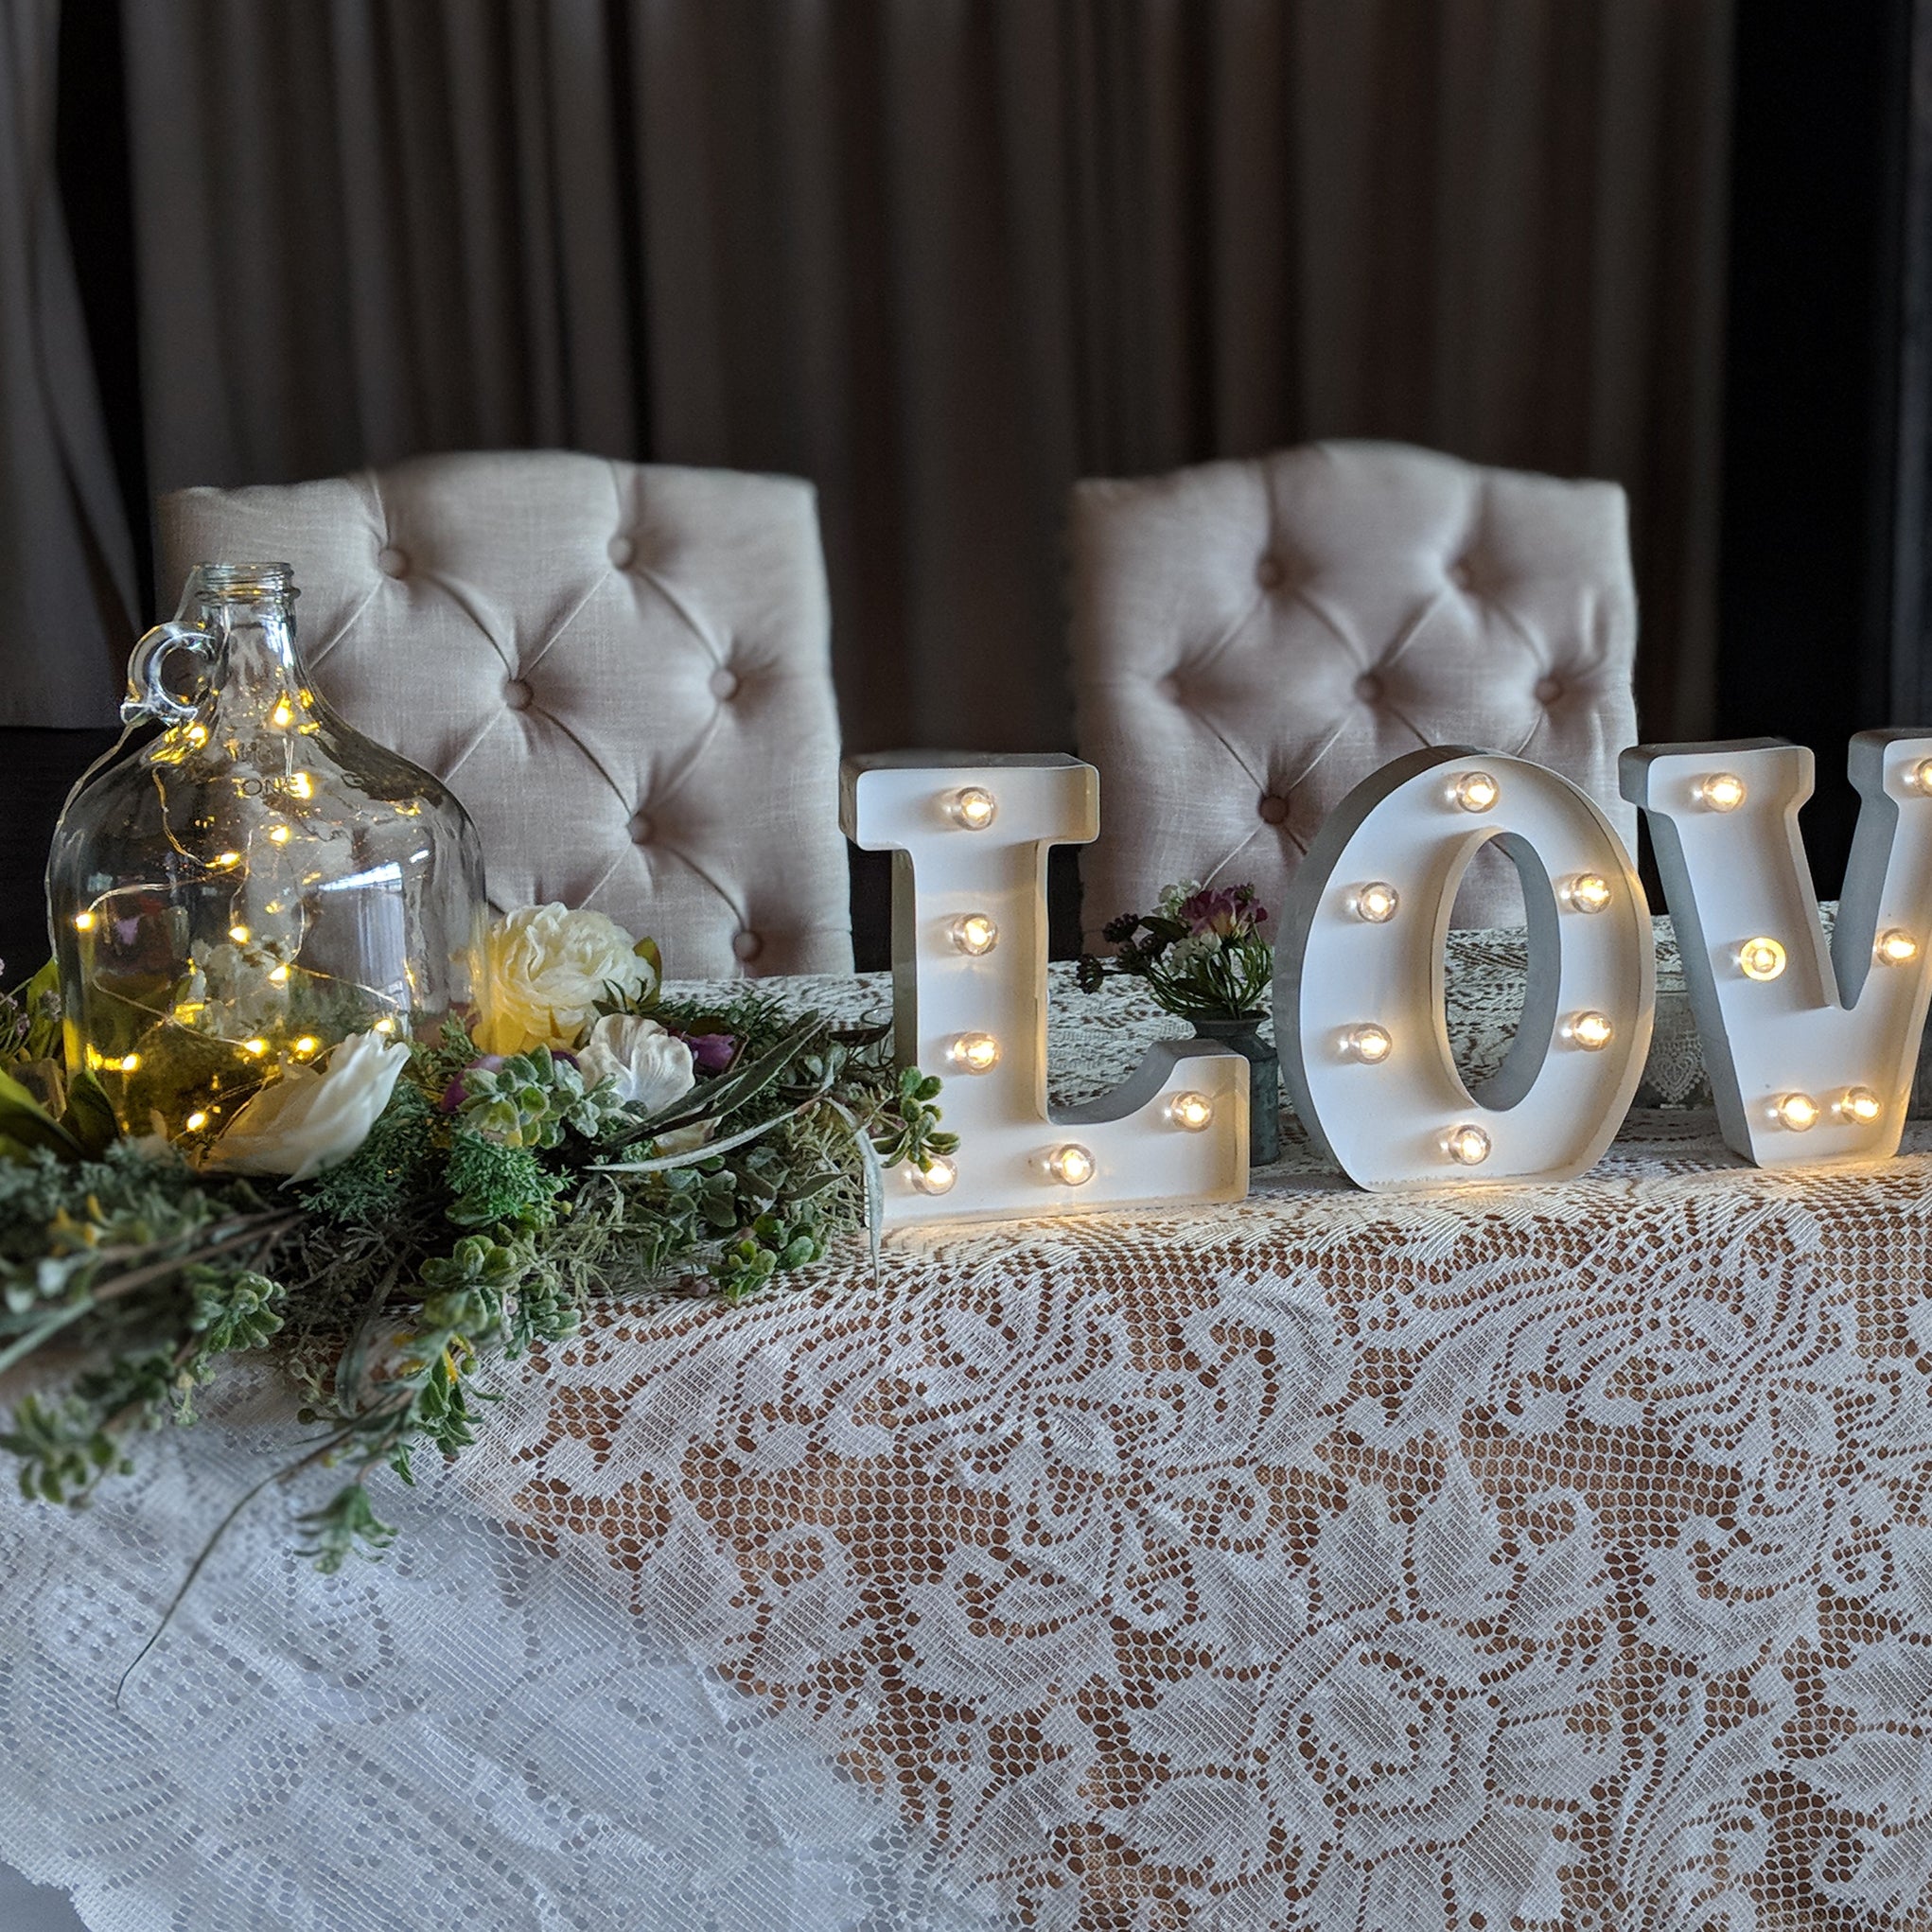 Tufted Sweetheart Chairs - The Wedding Shop